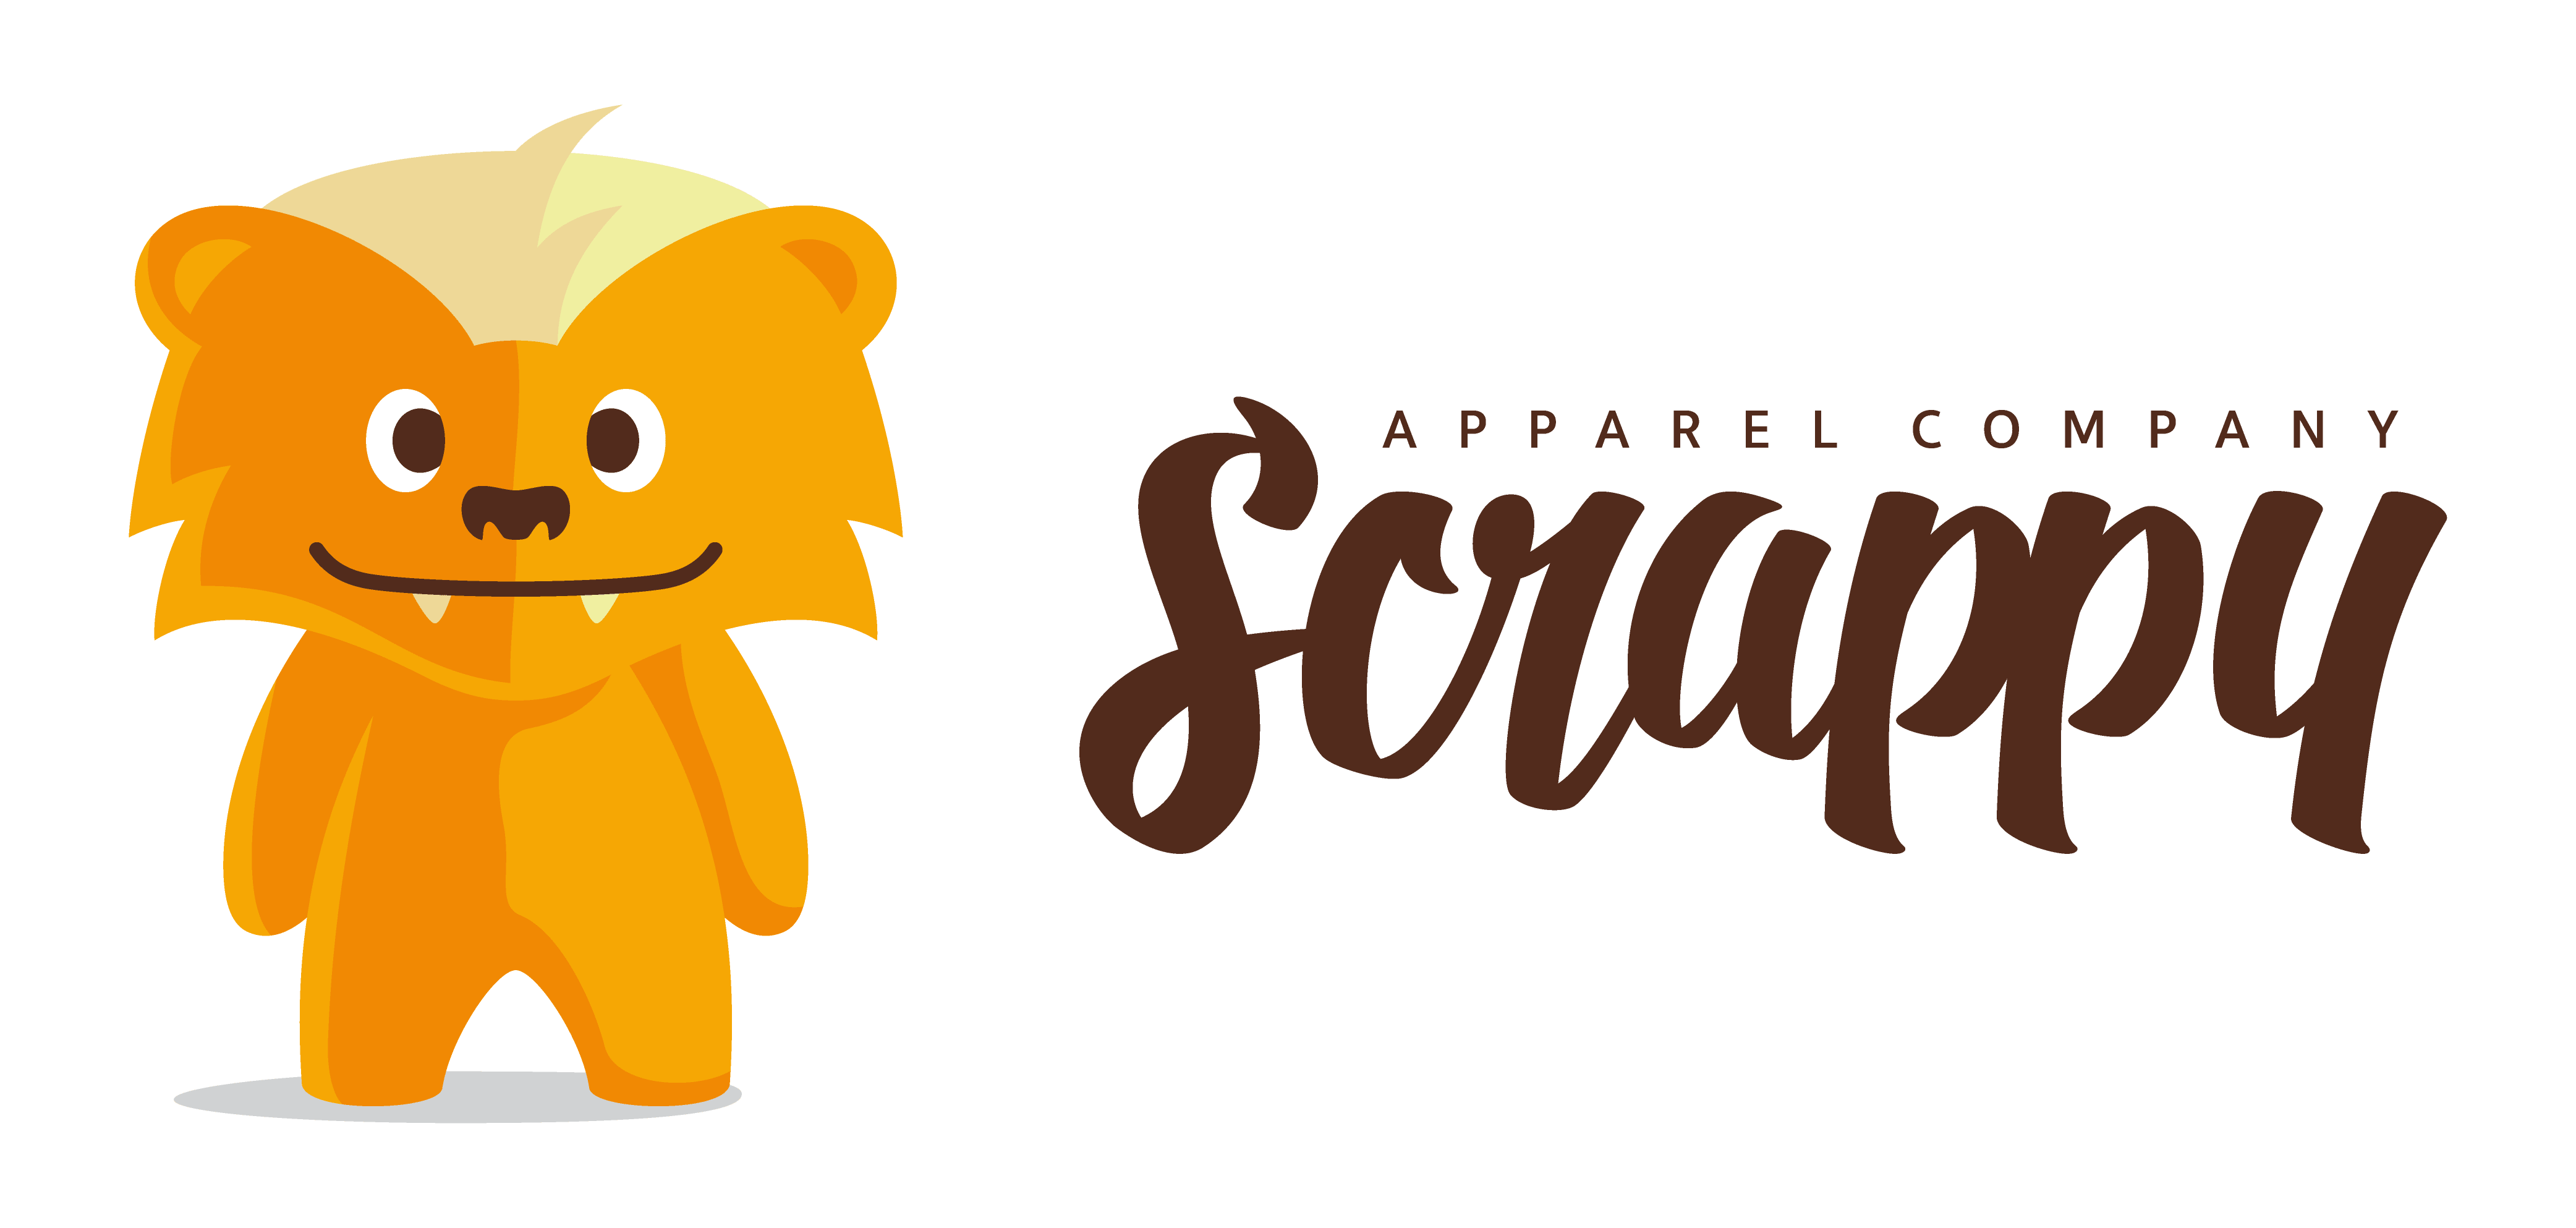 Contact Best Customized T Shirt Printing Company | Scrappy Apparel